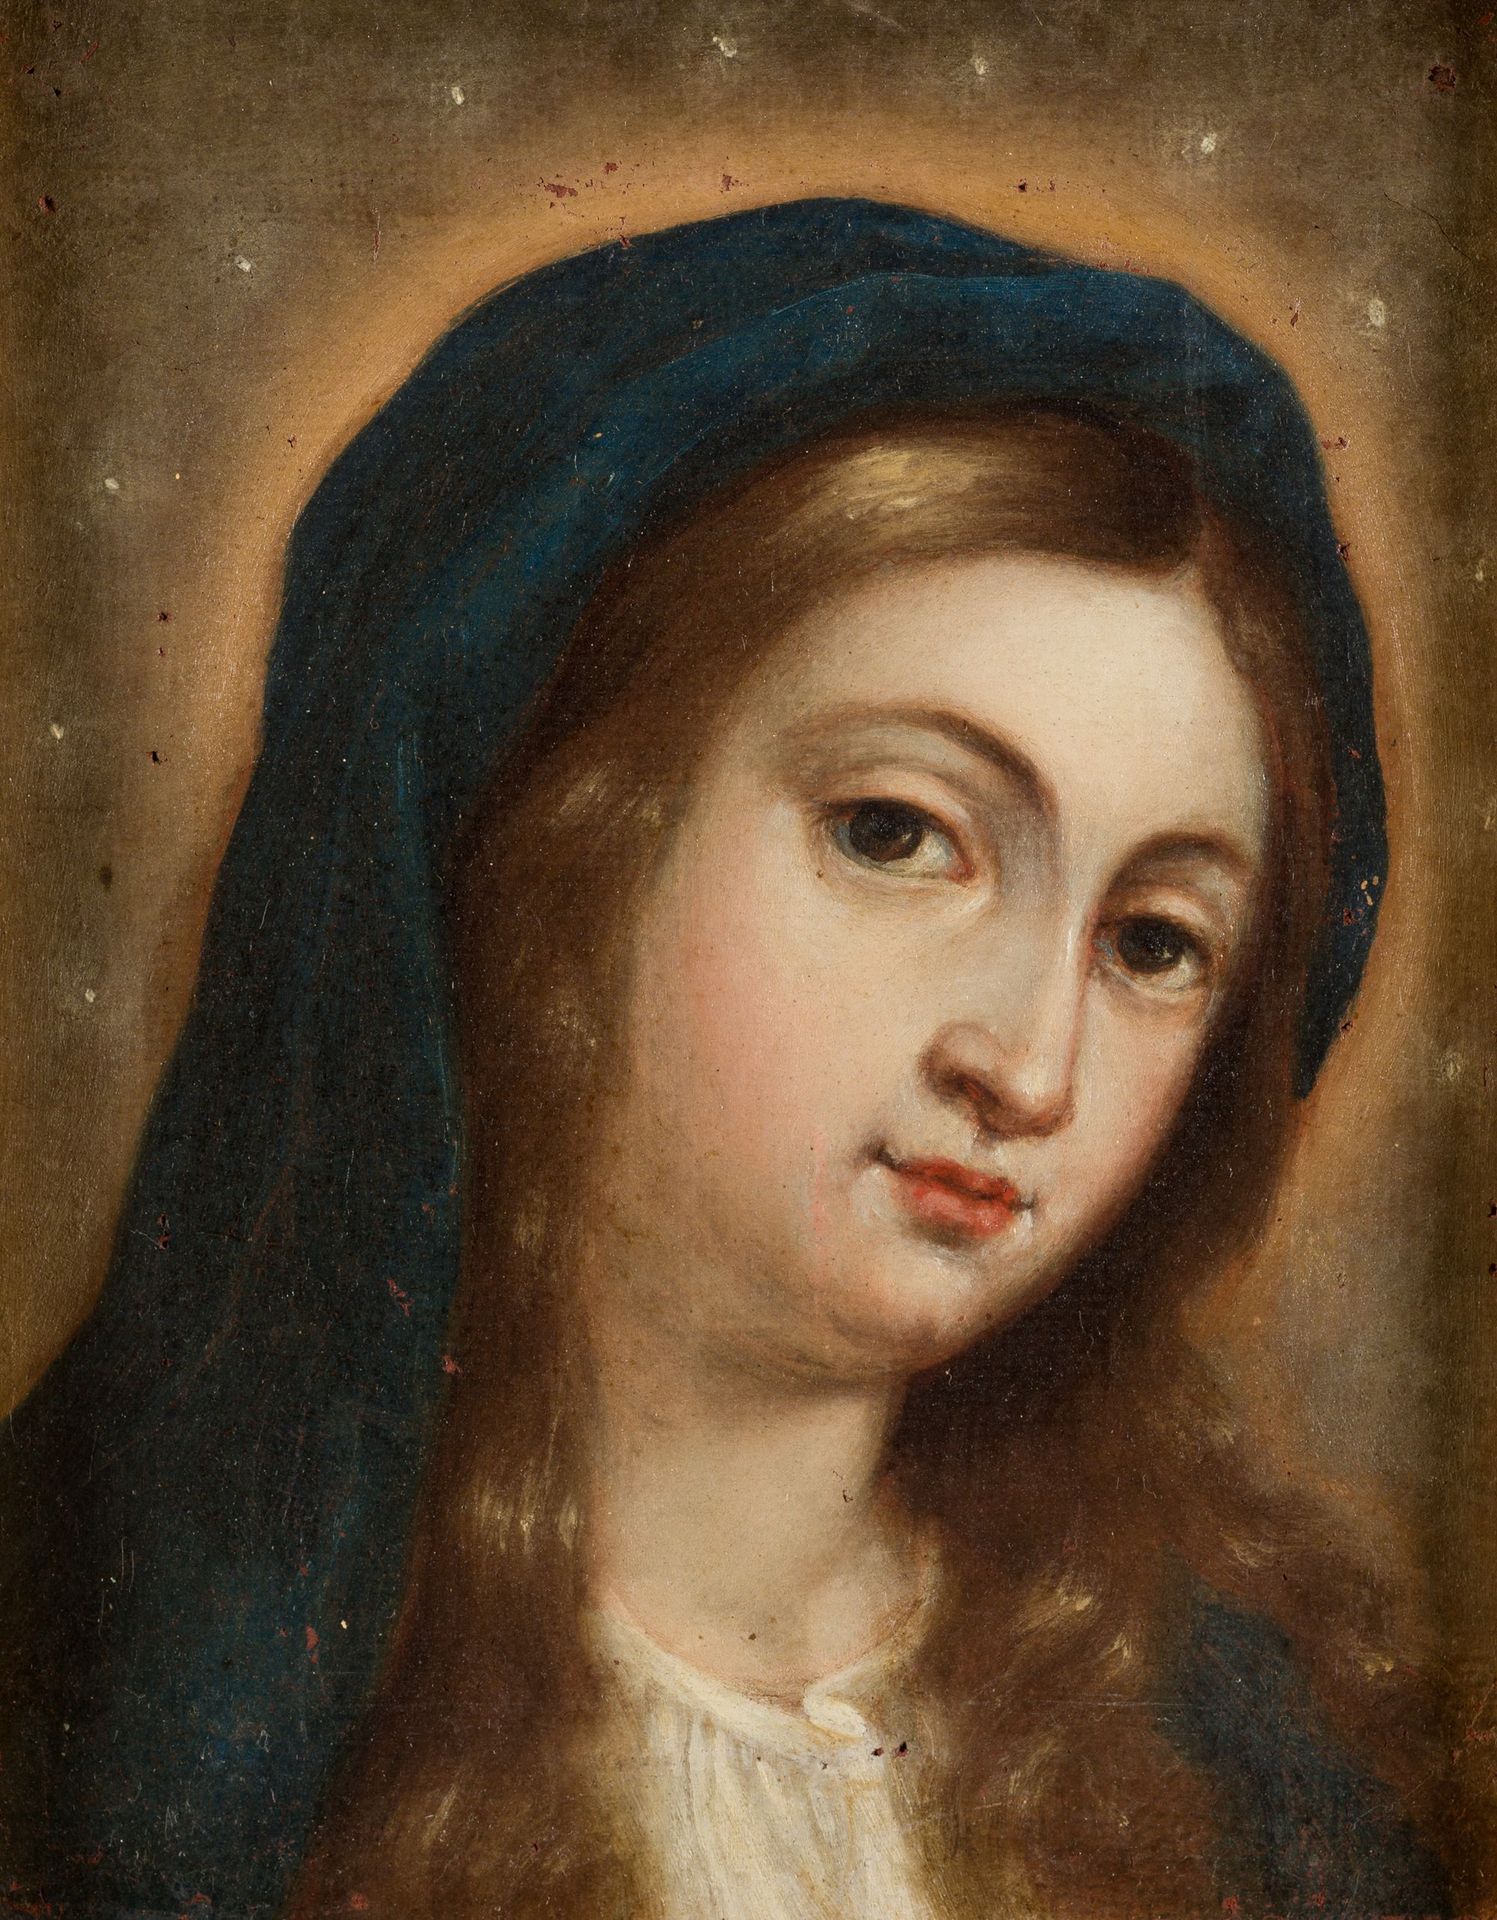 SPANISH SCHOOL (C. 18th / .) "Mary Immaculate" Oil on canvas. 24 x 19 cm.